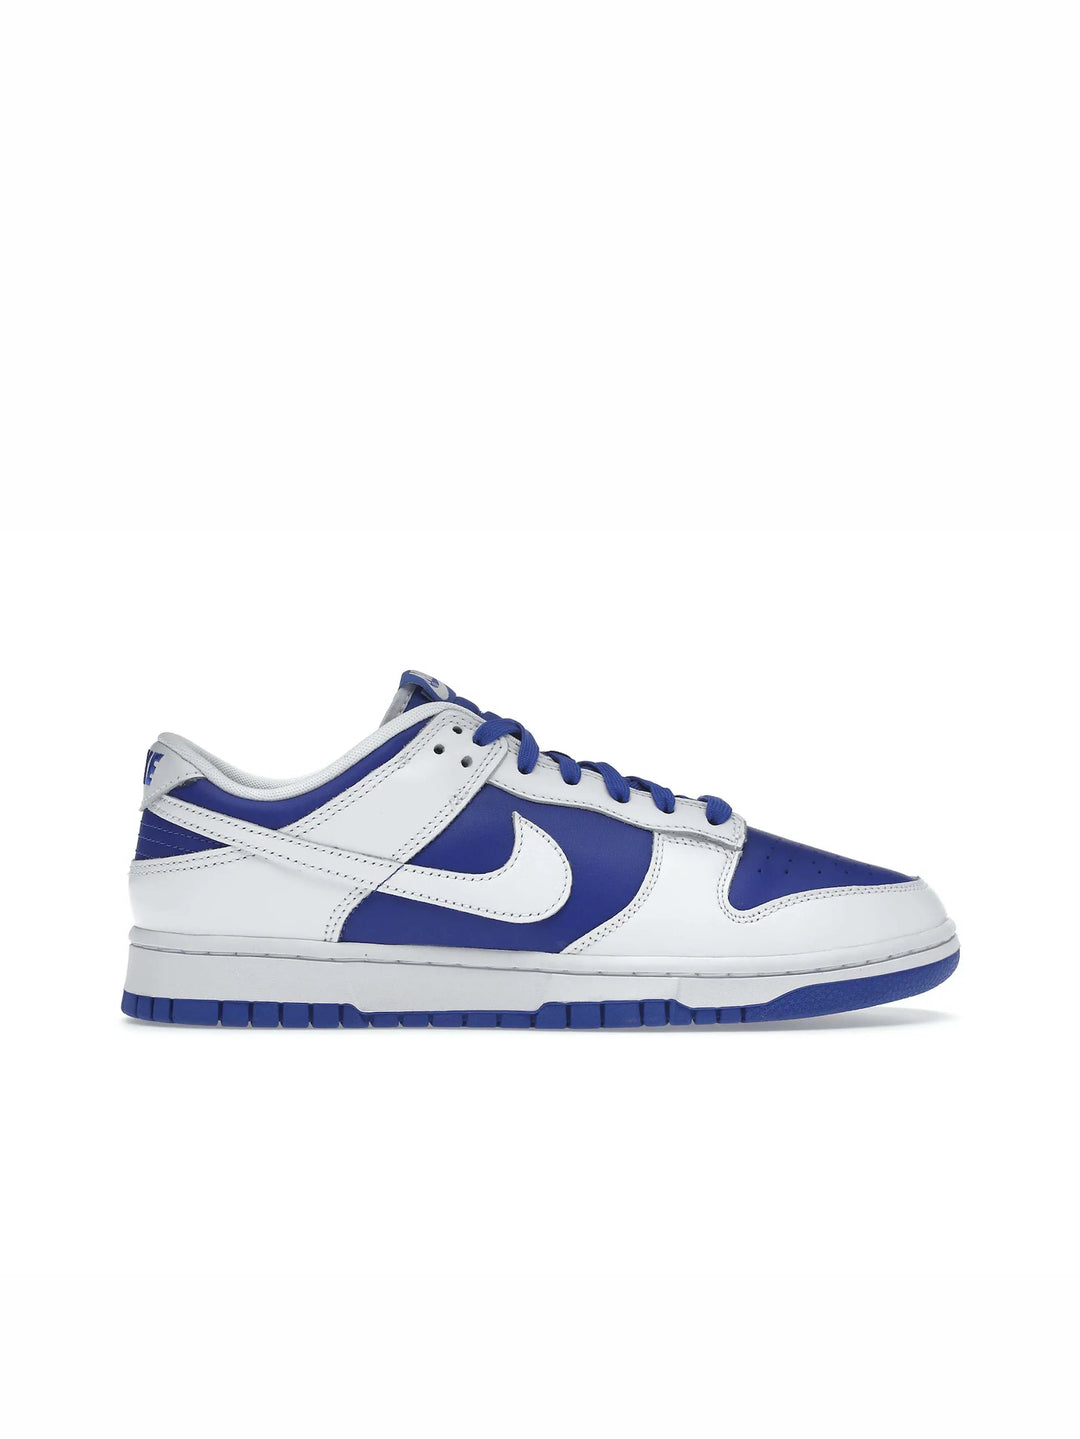 Nike Dunk Low Racer Blue White - Prior